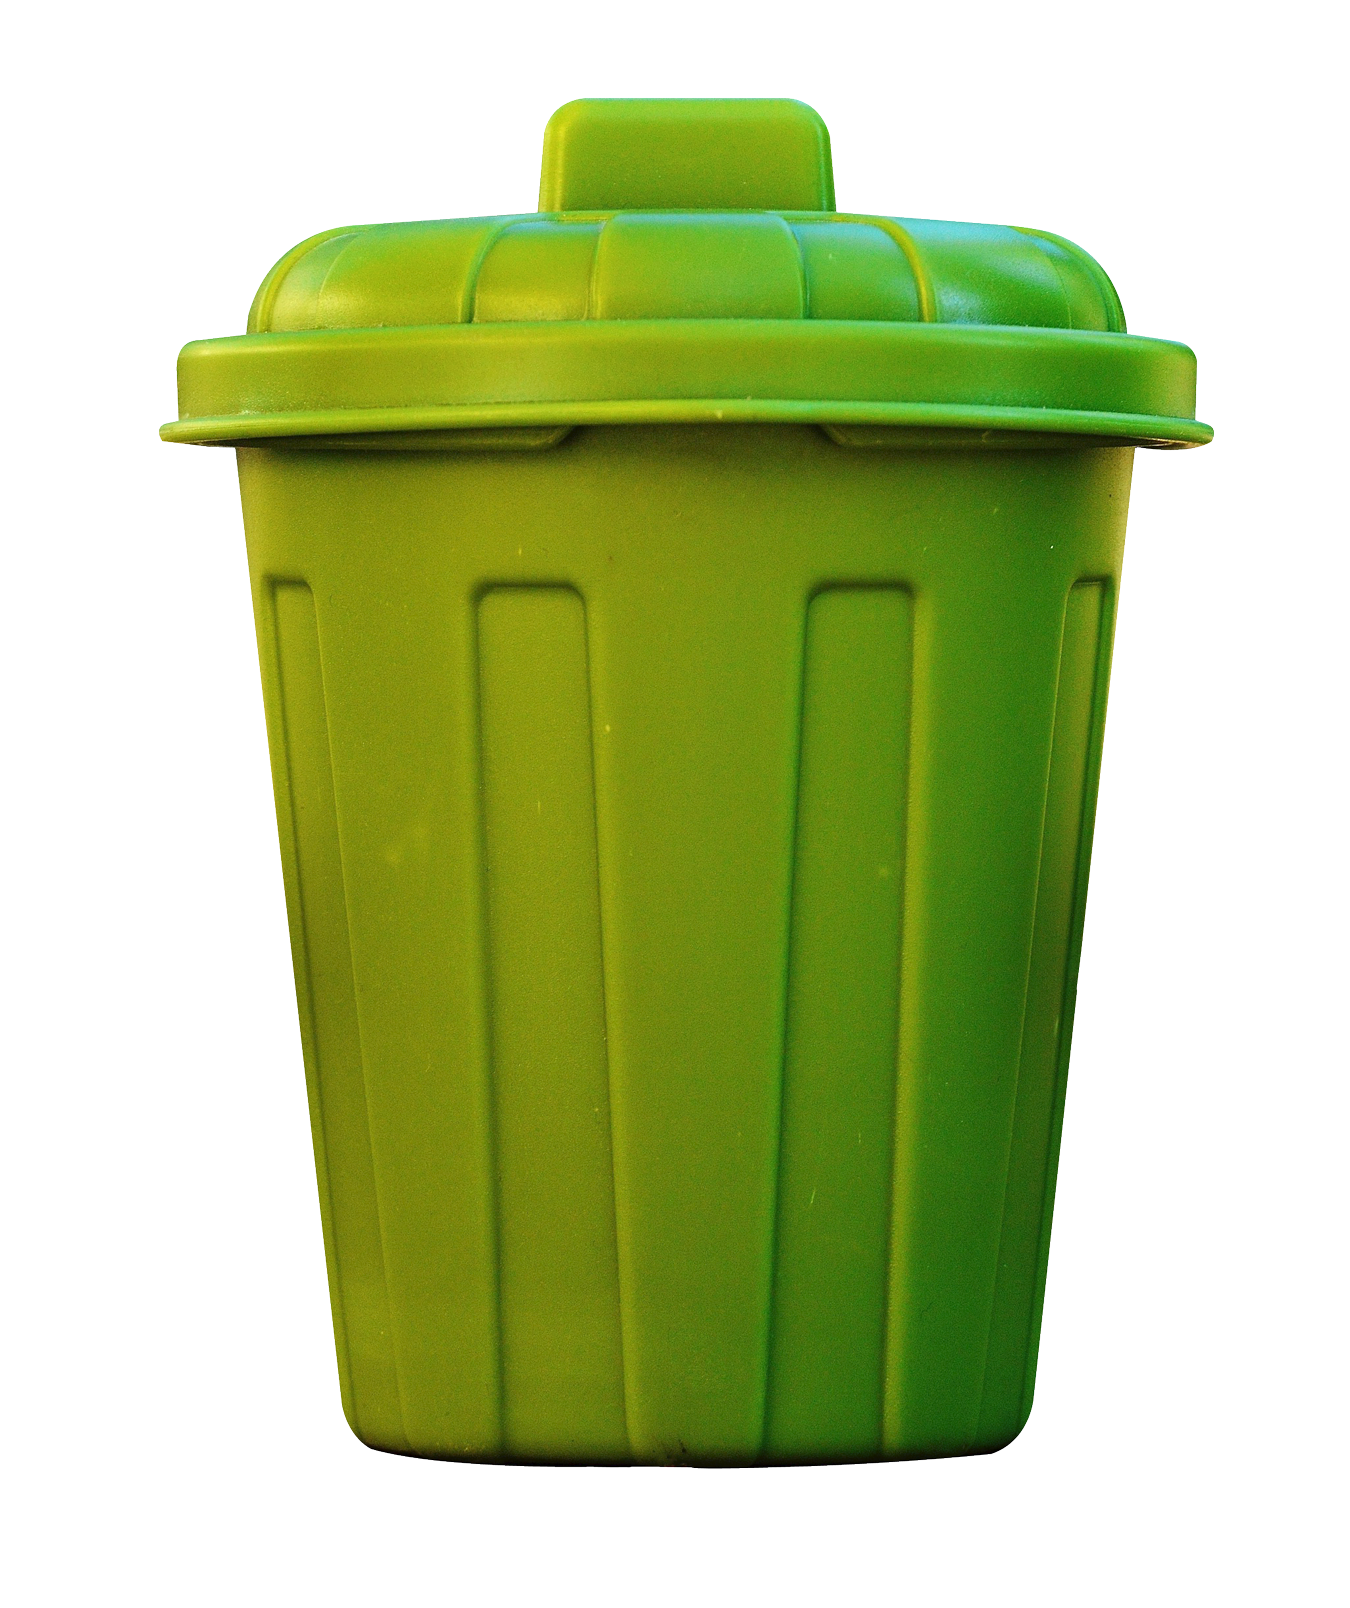 Use Dustbin PNG - 81843